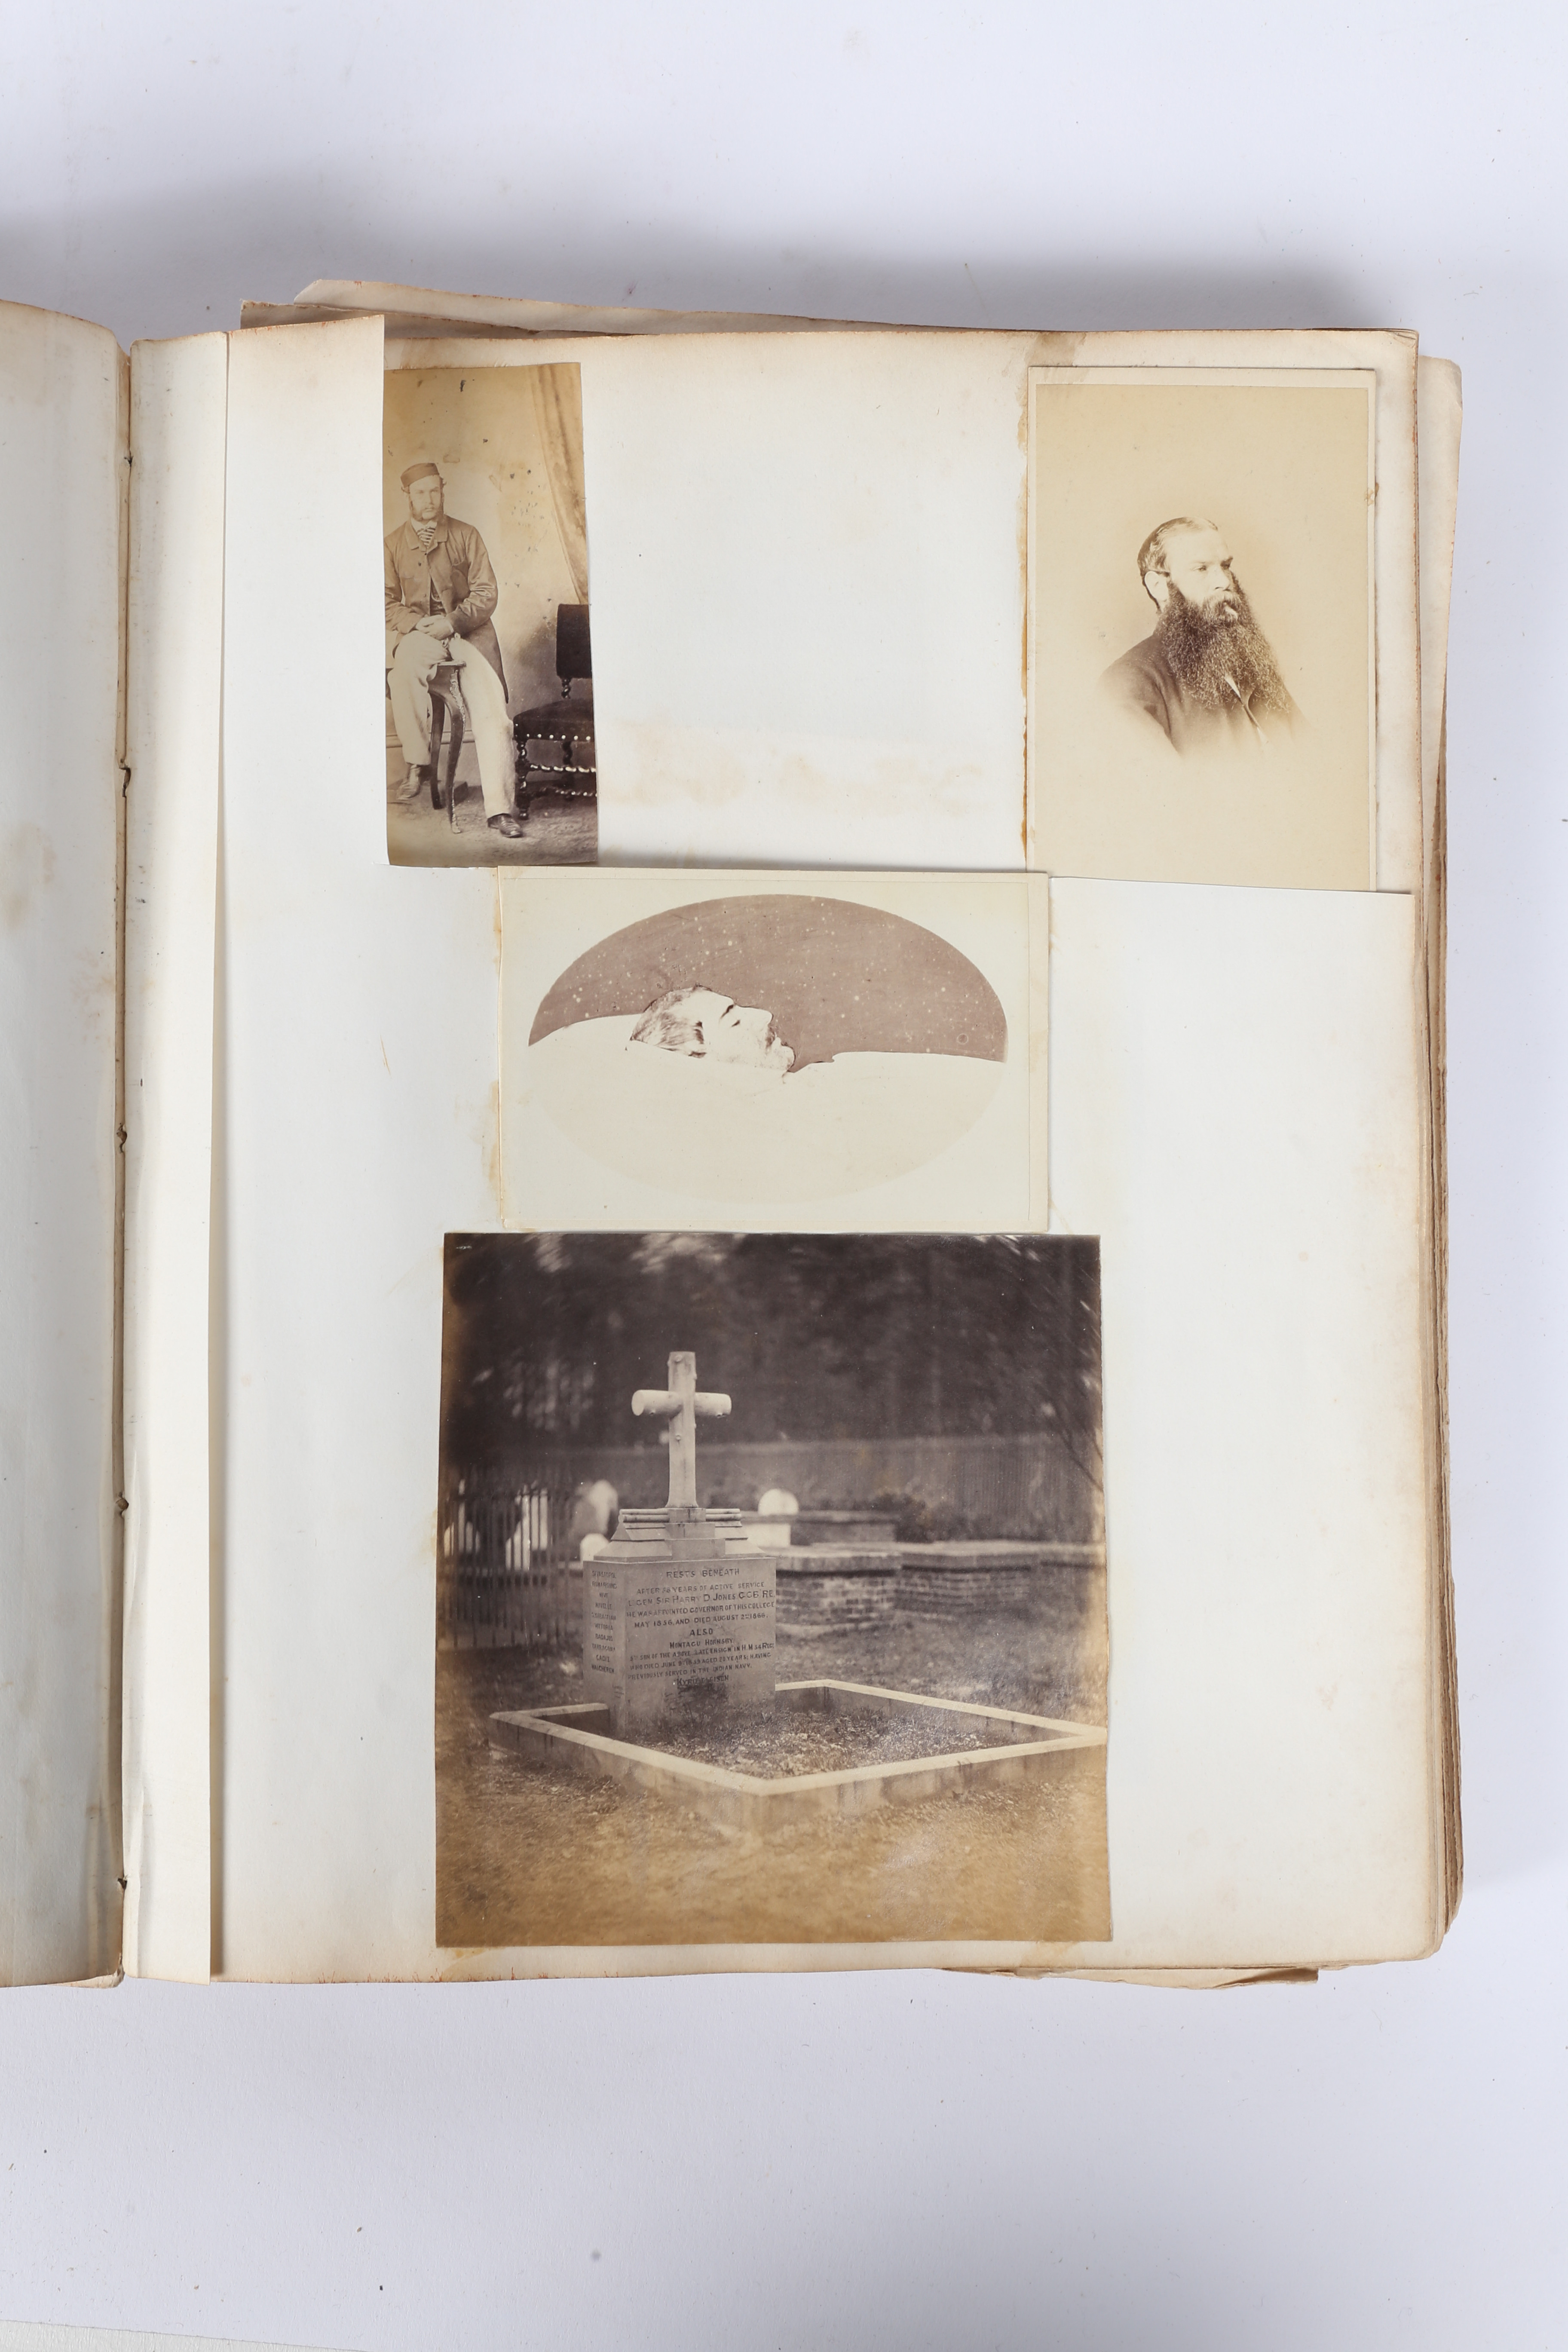 VICTORIAN PHOTOGRAPH ALBUM BELONGING TO GENERAL SIR HARRY JONES GCB DCL, AND HIS WIFE LADY CHARLOTTE - Image 51 of 60